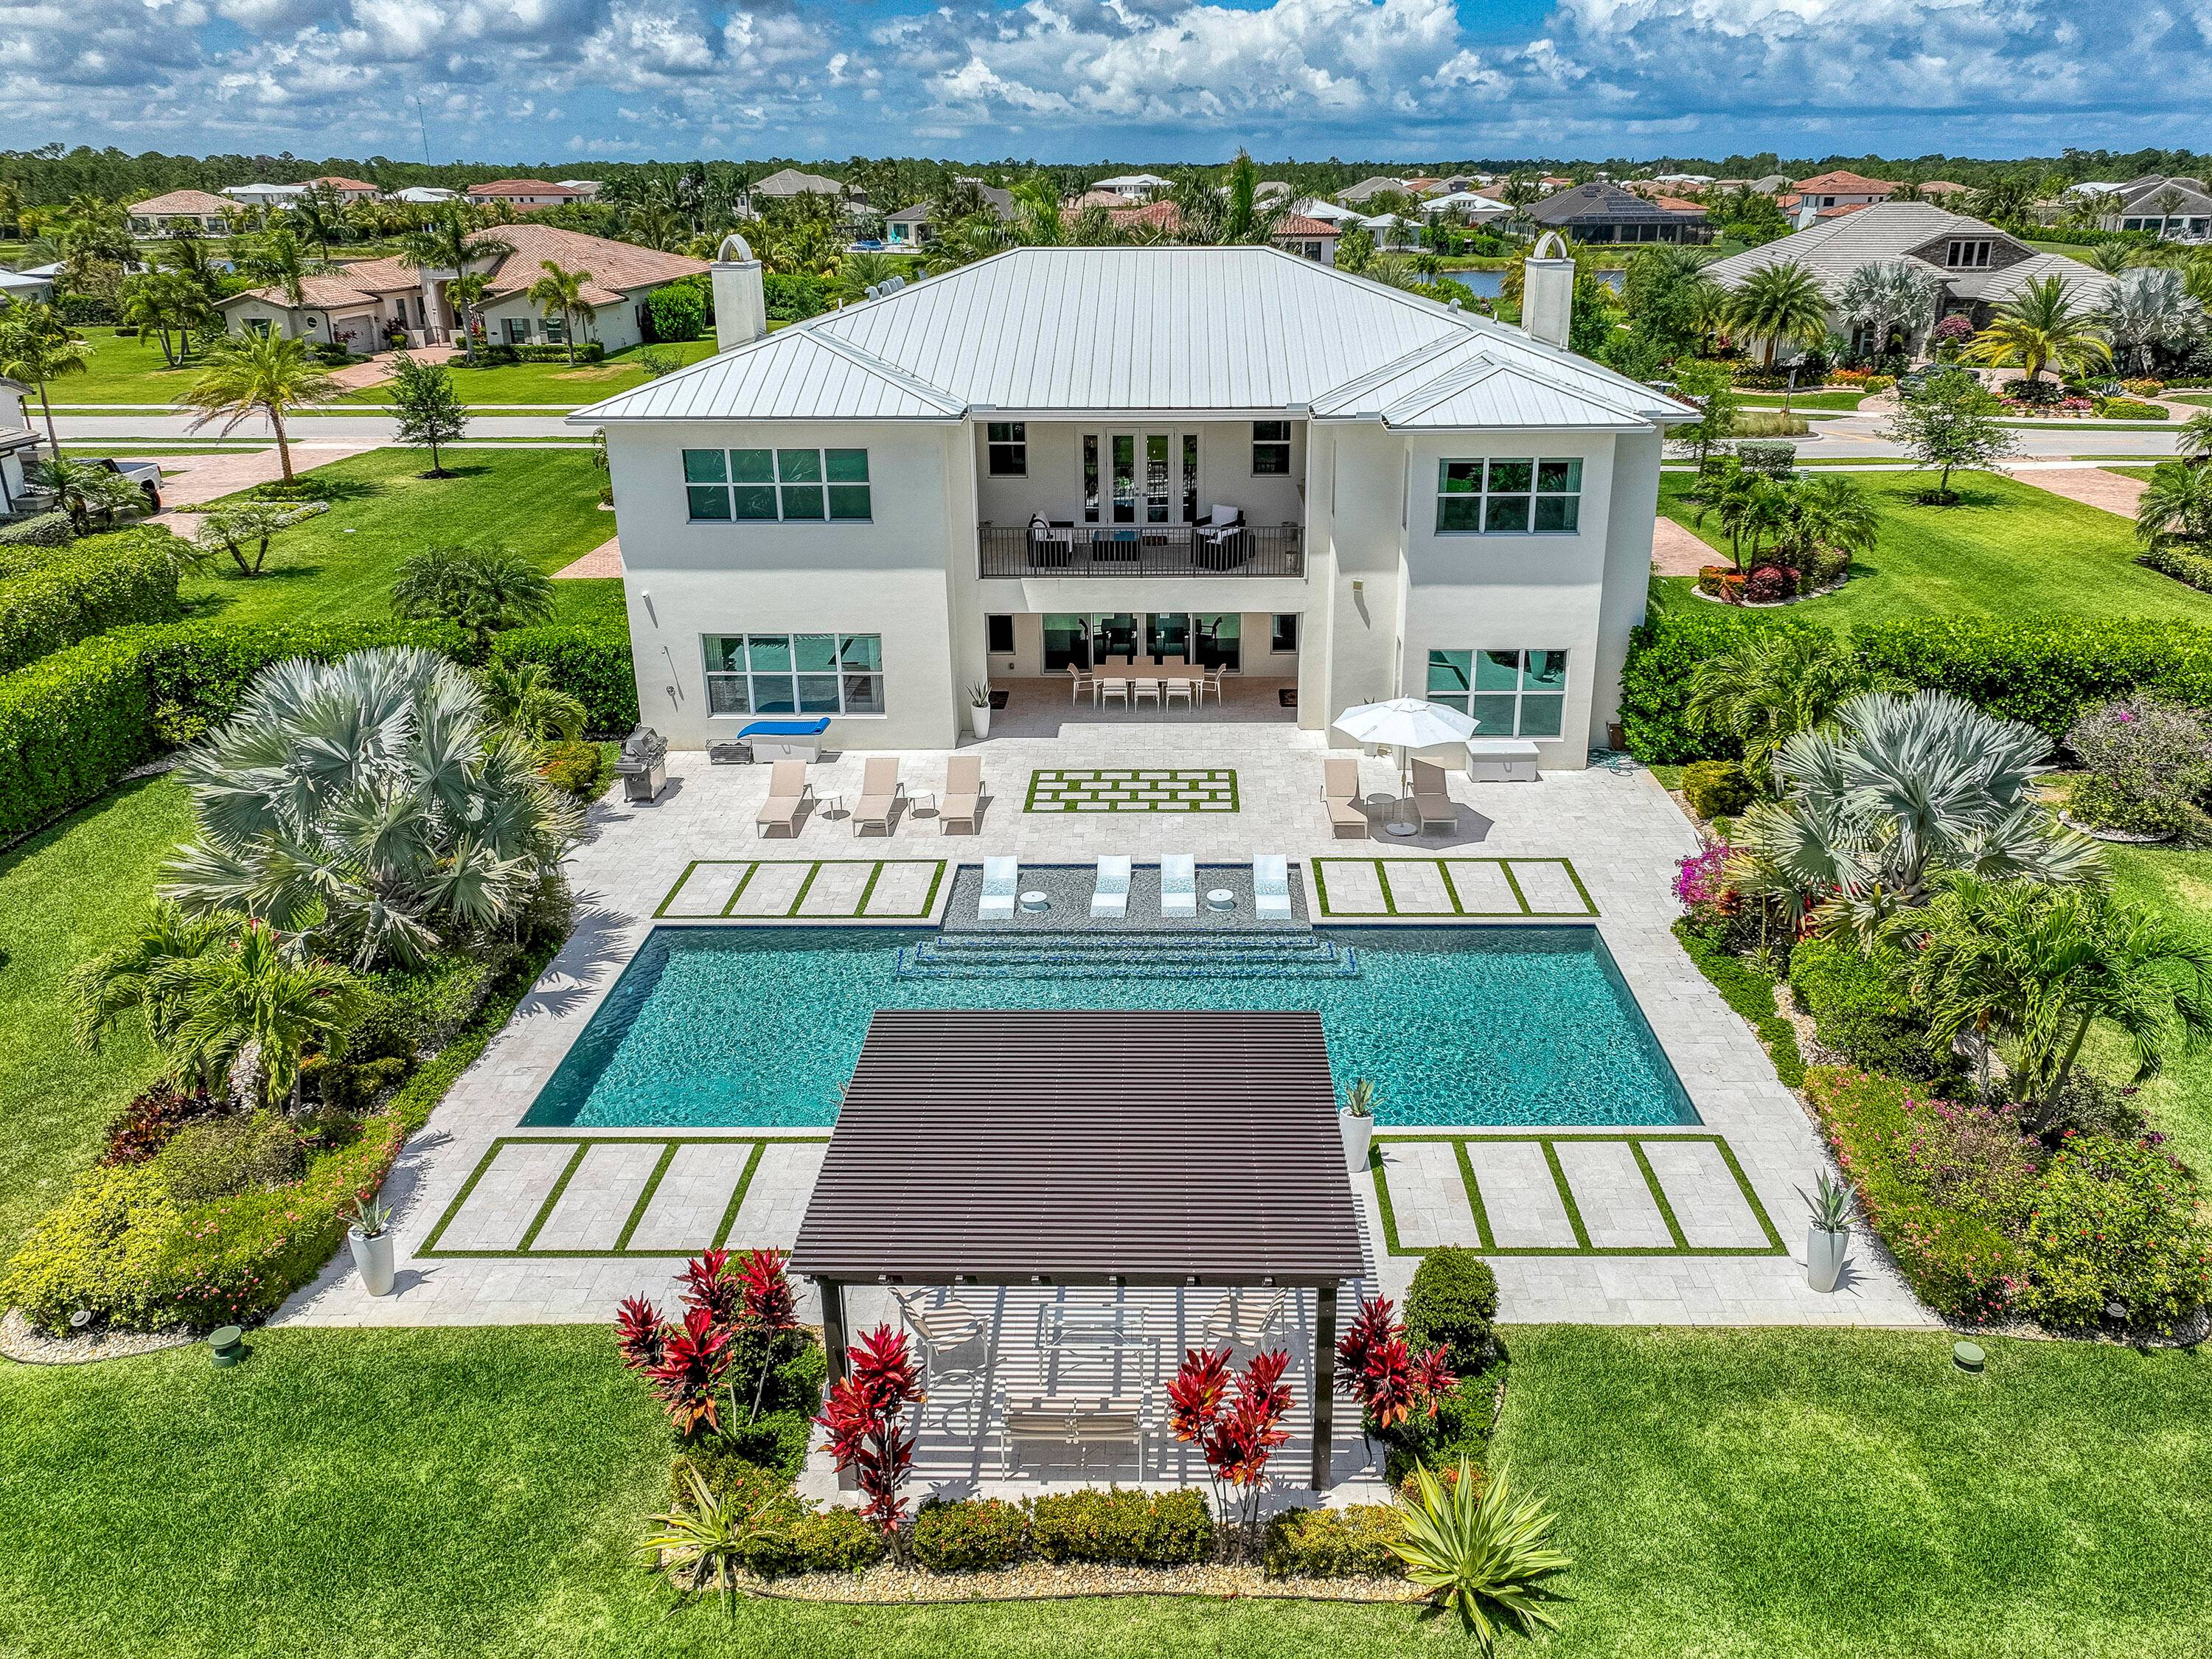 Welcome to the epitome of luxury living in the exclusive gated community of Prado Jupiter.